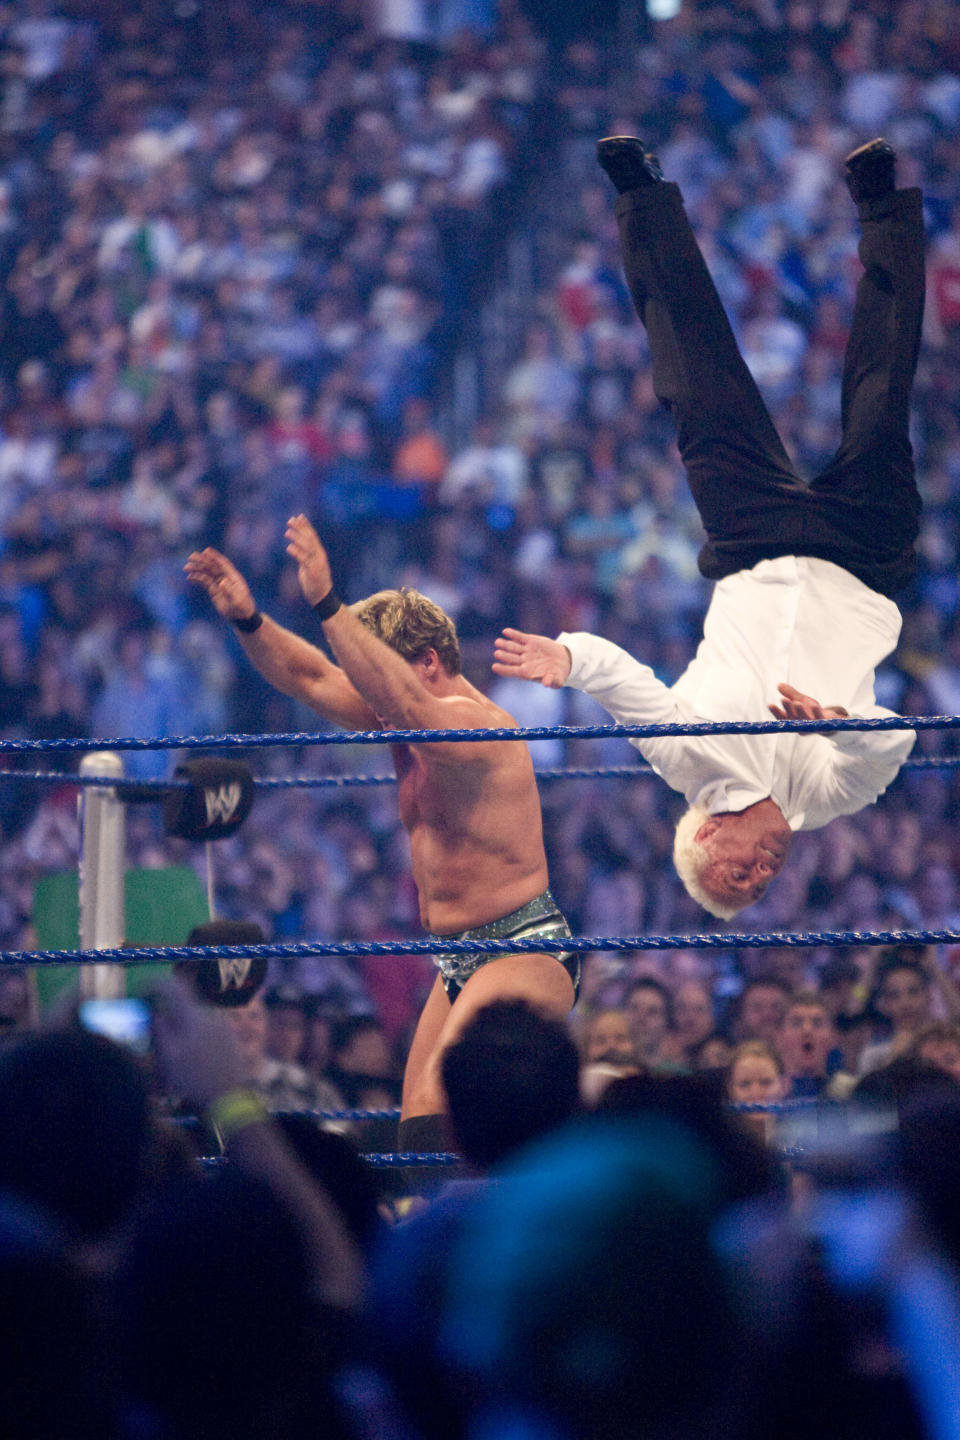 <p>ickey Rourke bested WWE fighter Jericho in a match that lasted less than a minute. The Wrestler star, 56, was at WrestleMania 25 on April 5 at Reliant Stadium in Houston, in support of friends Ric Flair, and WWE Hall of Famers Jimmy Snuka, Roddy Piper and Ricky Steamboat. World Wrestling Entertainment star Chris Jericho challenged Rourke’s pals — WWE Hall of Famers Jimmy Snuka, Roddy Piper and Ricky Steamboat — to a match at the always wild WWE event after Rourke renegged on the duel. HOUSTON, TX. (Bill Olive/Getty Images). </p>